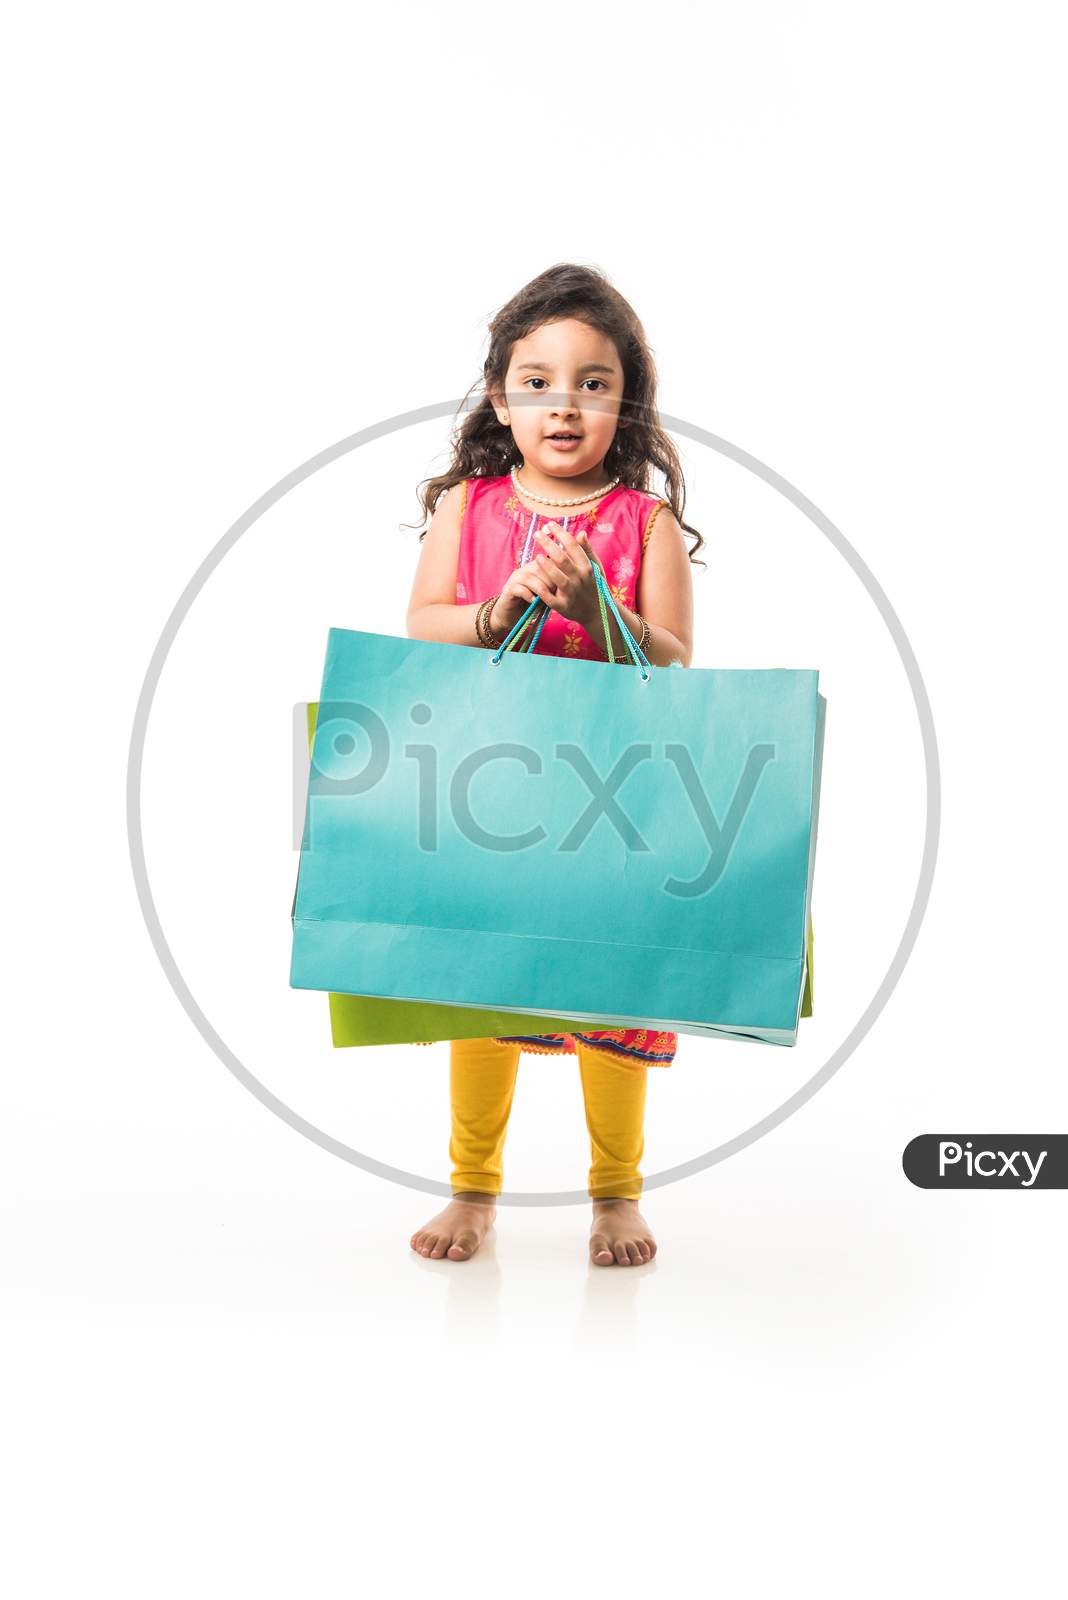 Indian small girl holding shopping bags, standing isolated over white background